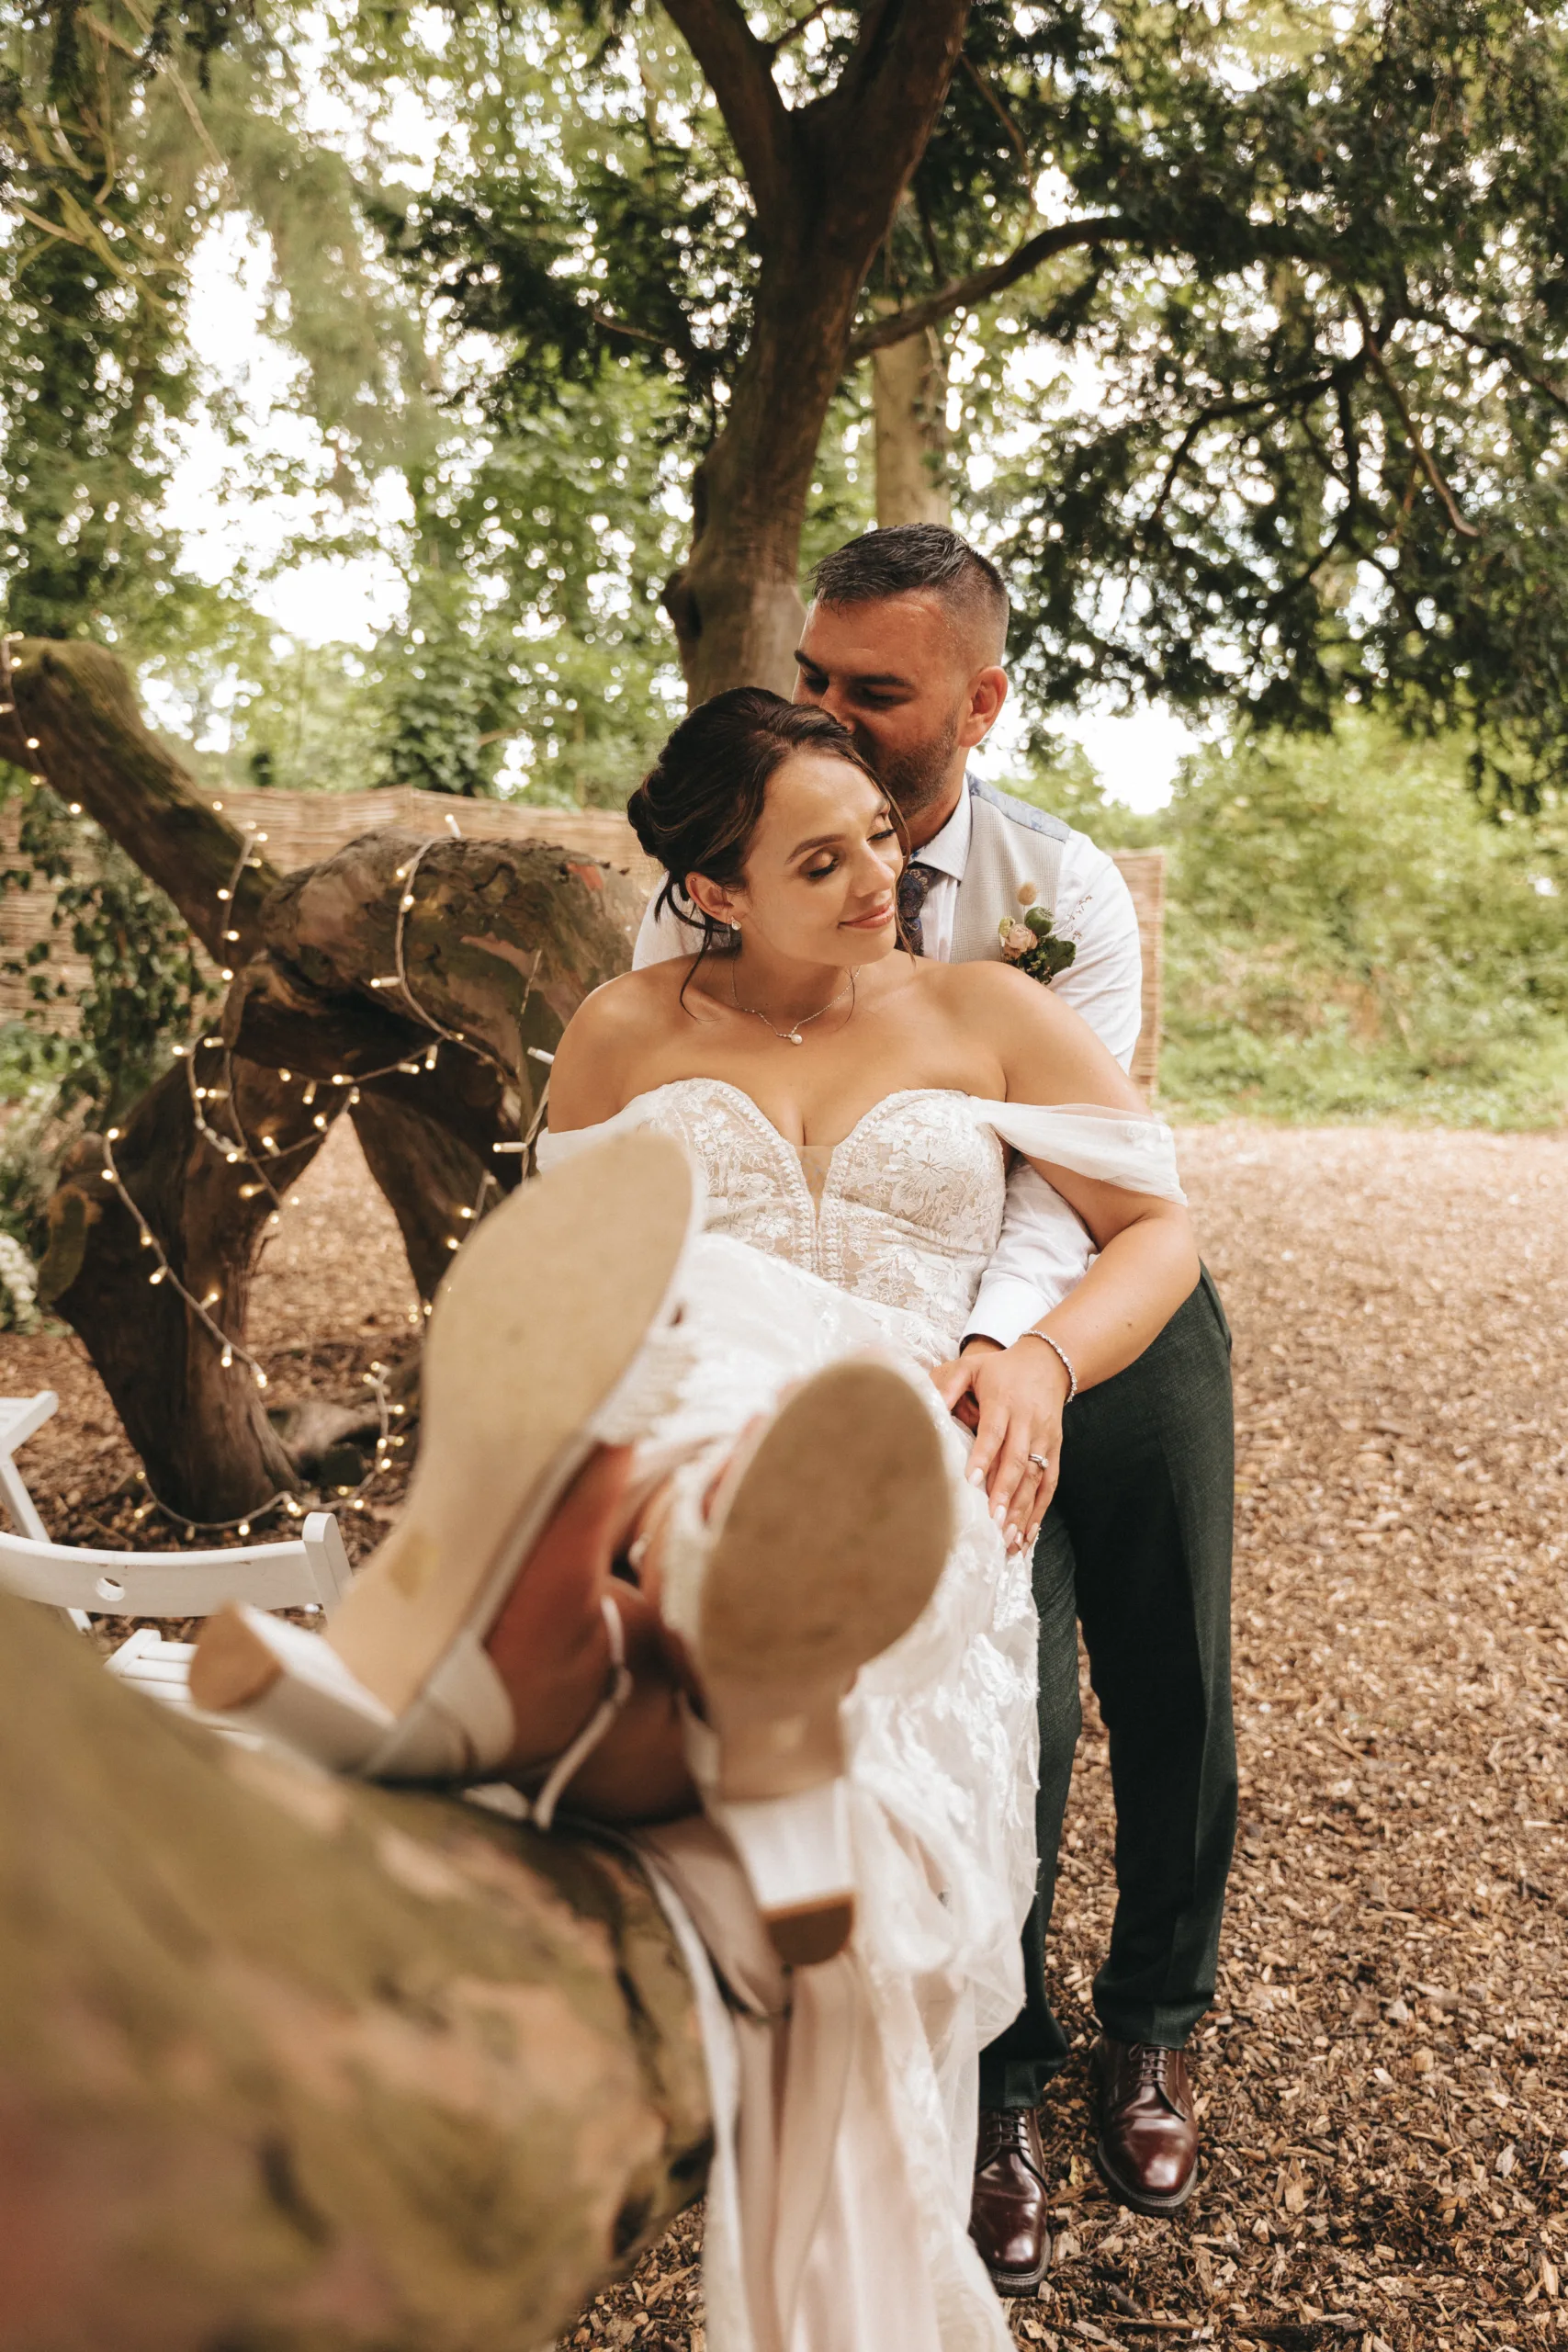 A bride and groom sitting on a log in the woods on their wedding day.